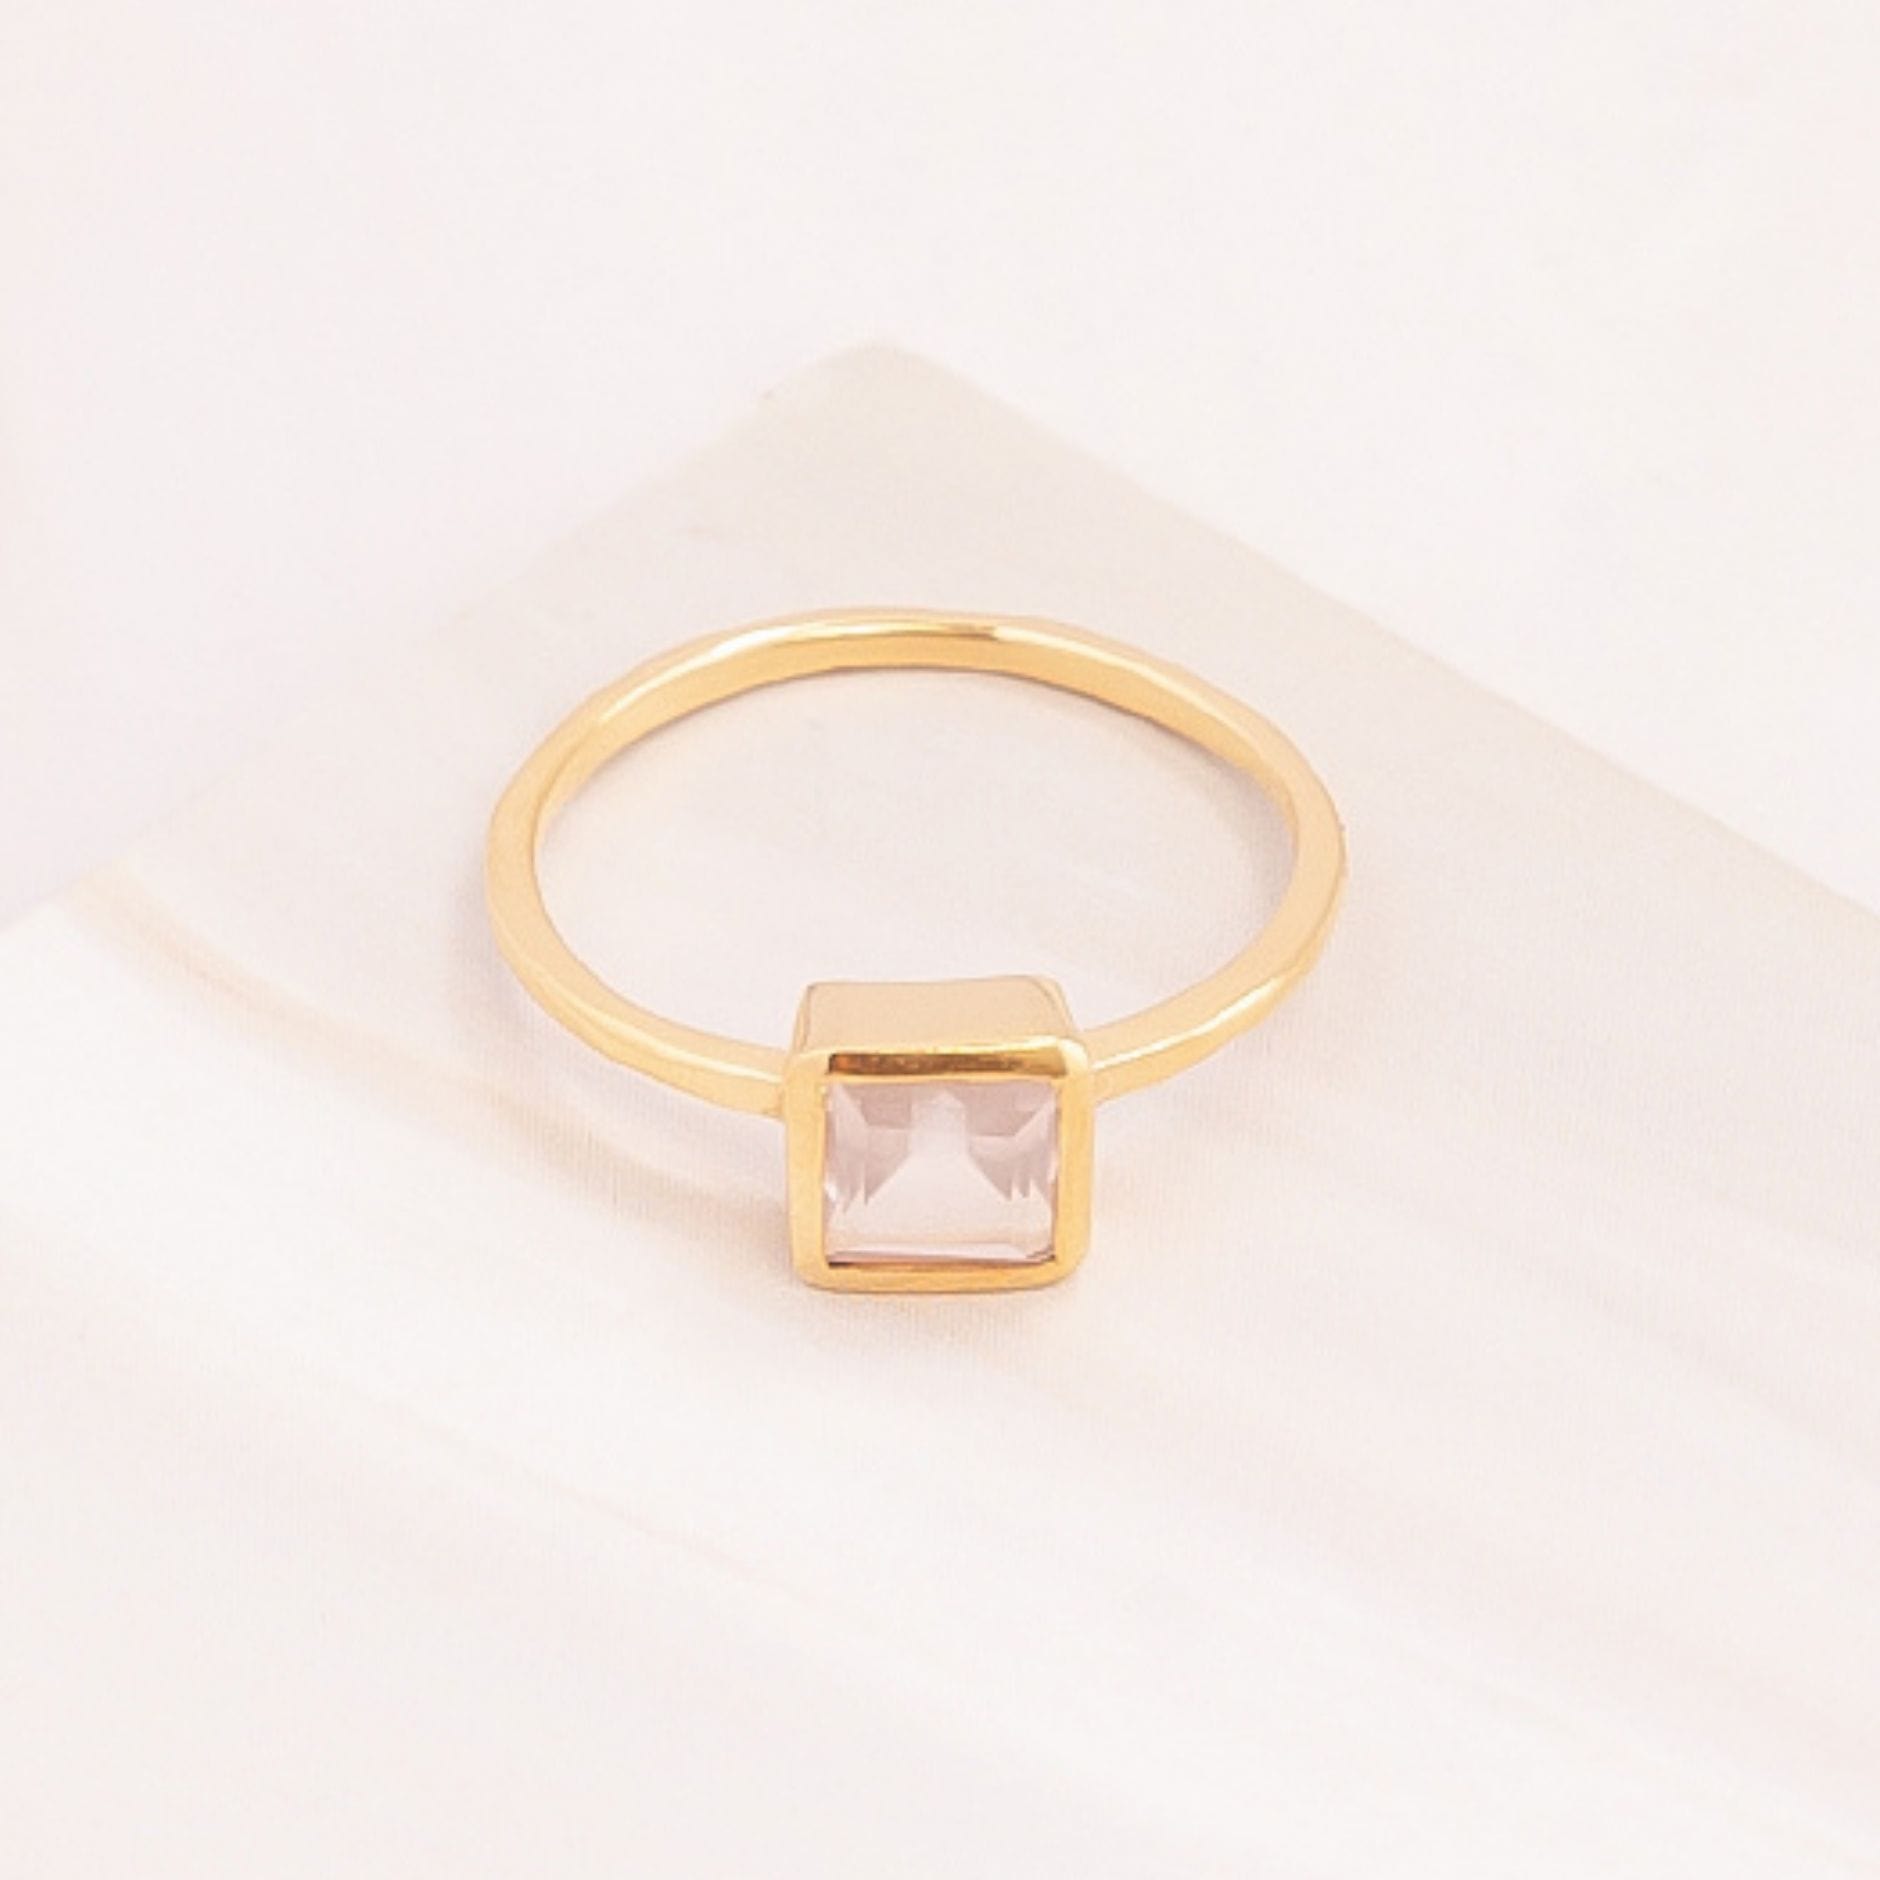 Emblem Jewelry Rings Rose Quartz / Square Signature Candy Gemstone Stack Rings (Ring Size 9)